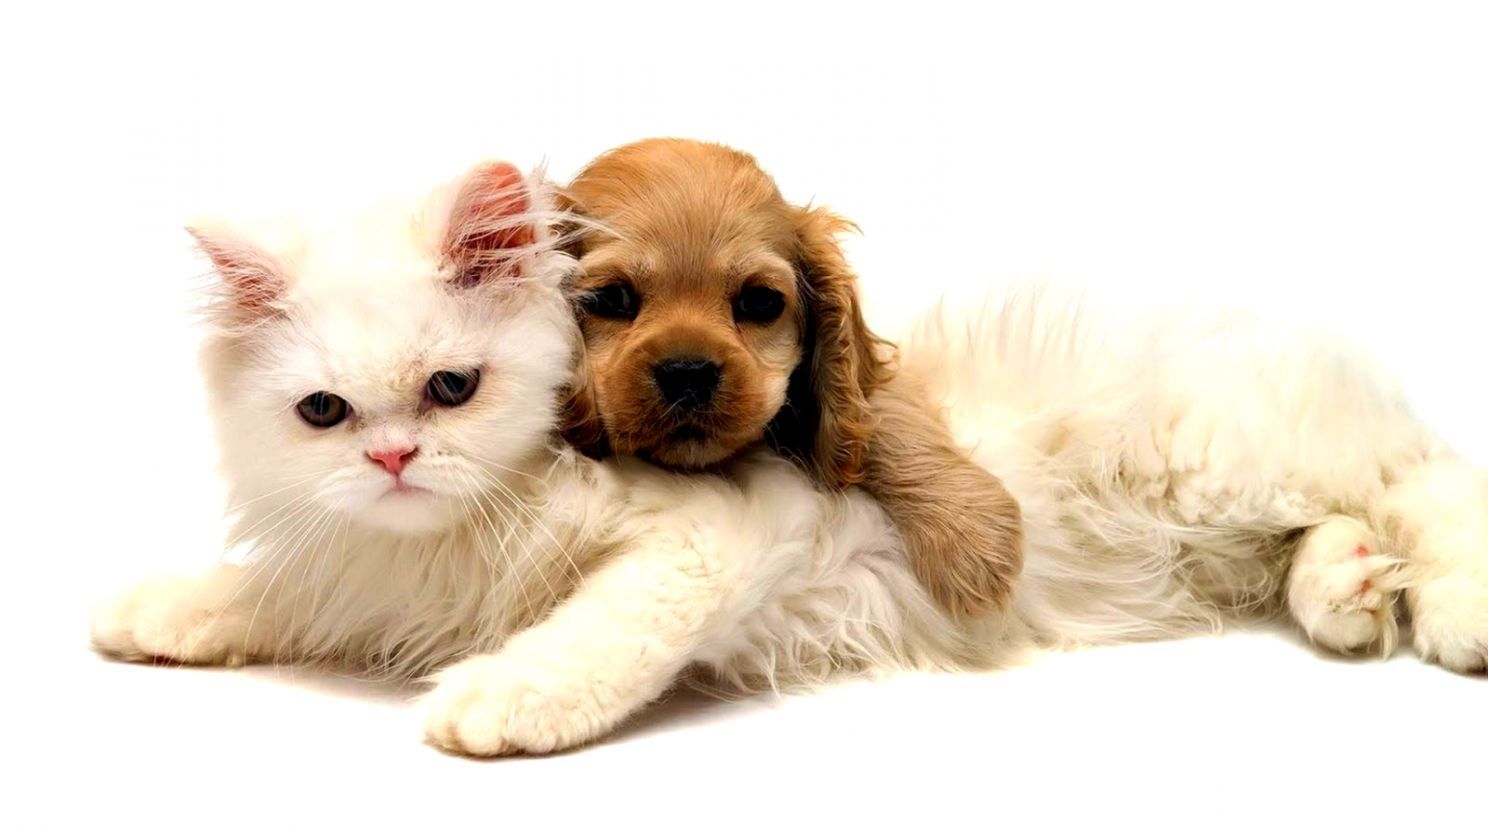 Cute Cat And Dog Wallpapers posted by Christopher Sellers